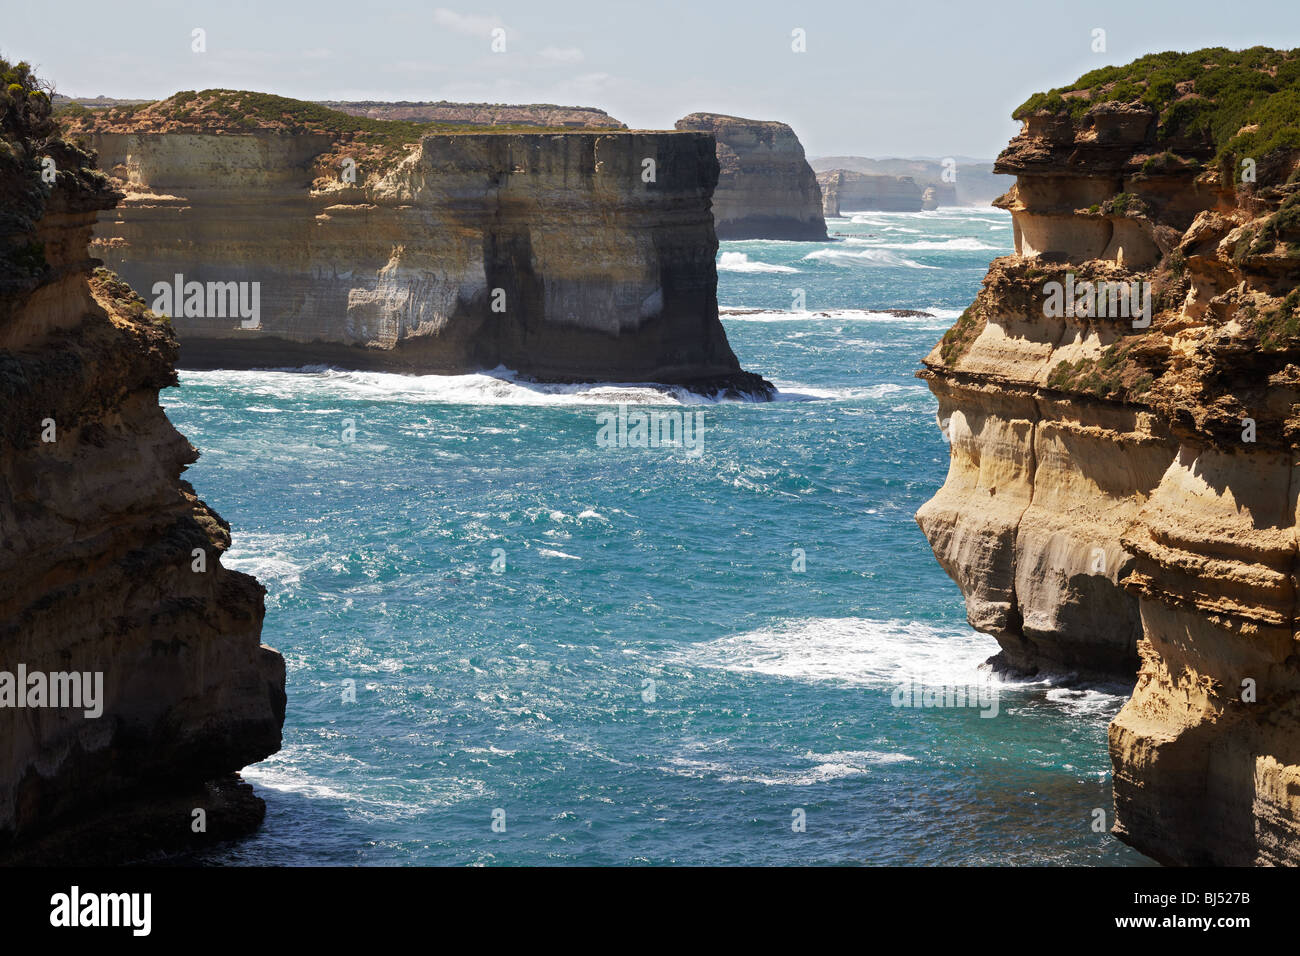 Spectacular coastal scenery at Loch Ard Gorge, Port Campbell National Park, Great Ocean Road, Victoria, Australia Stock Photo